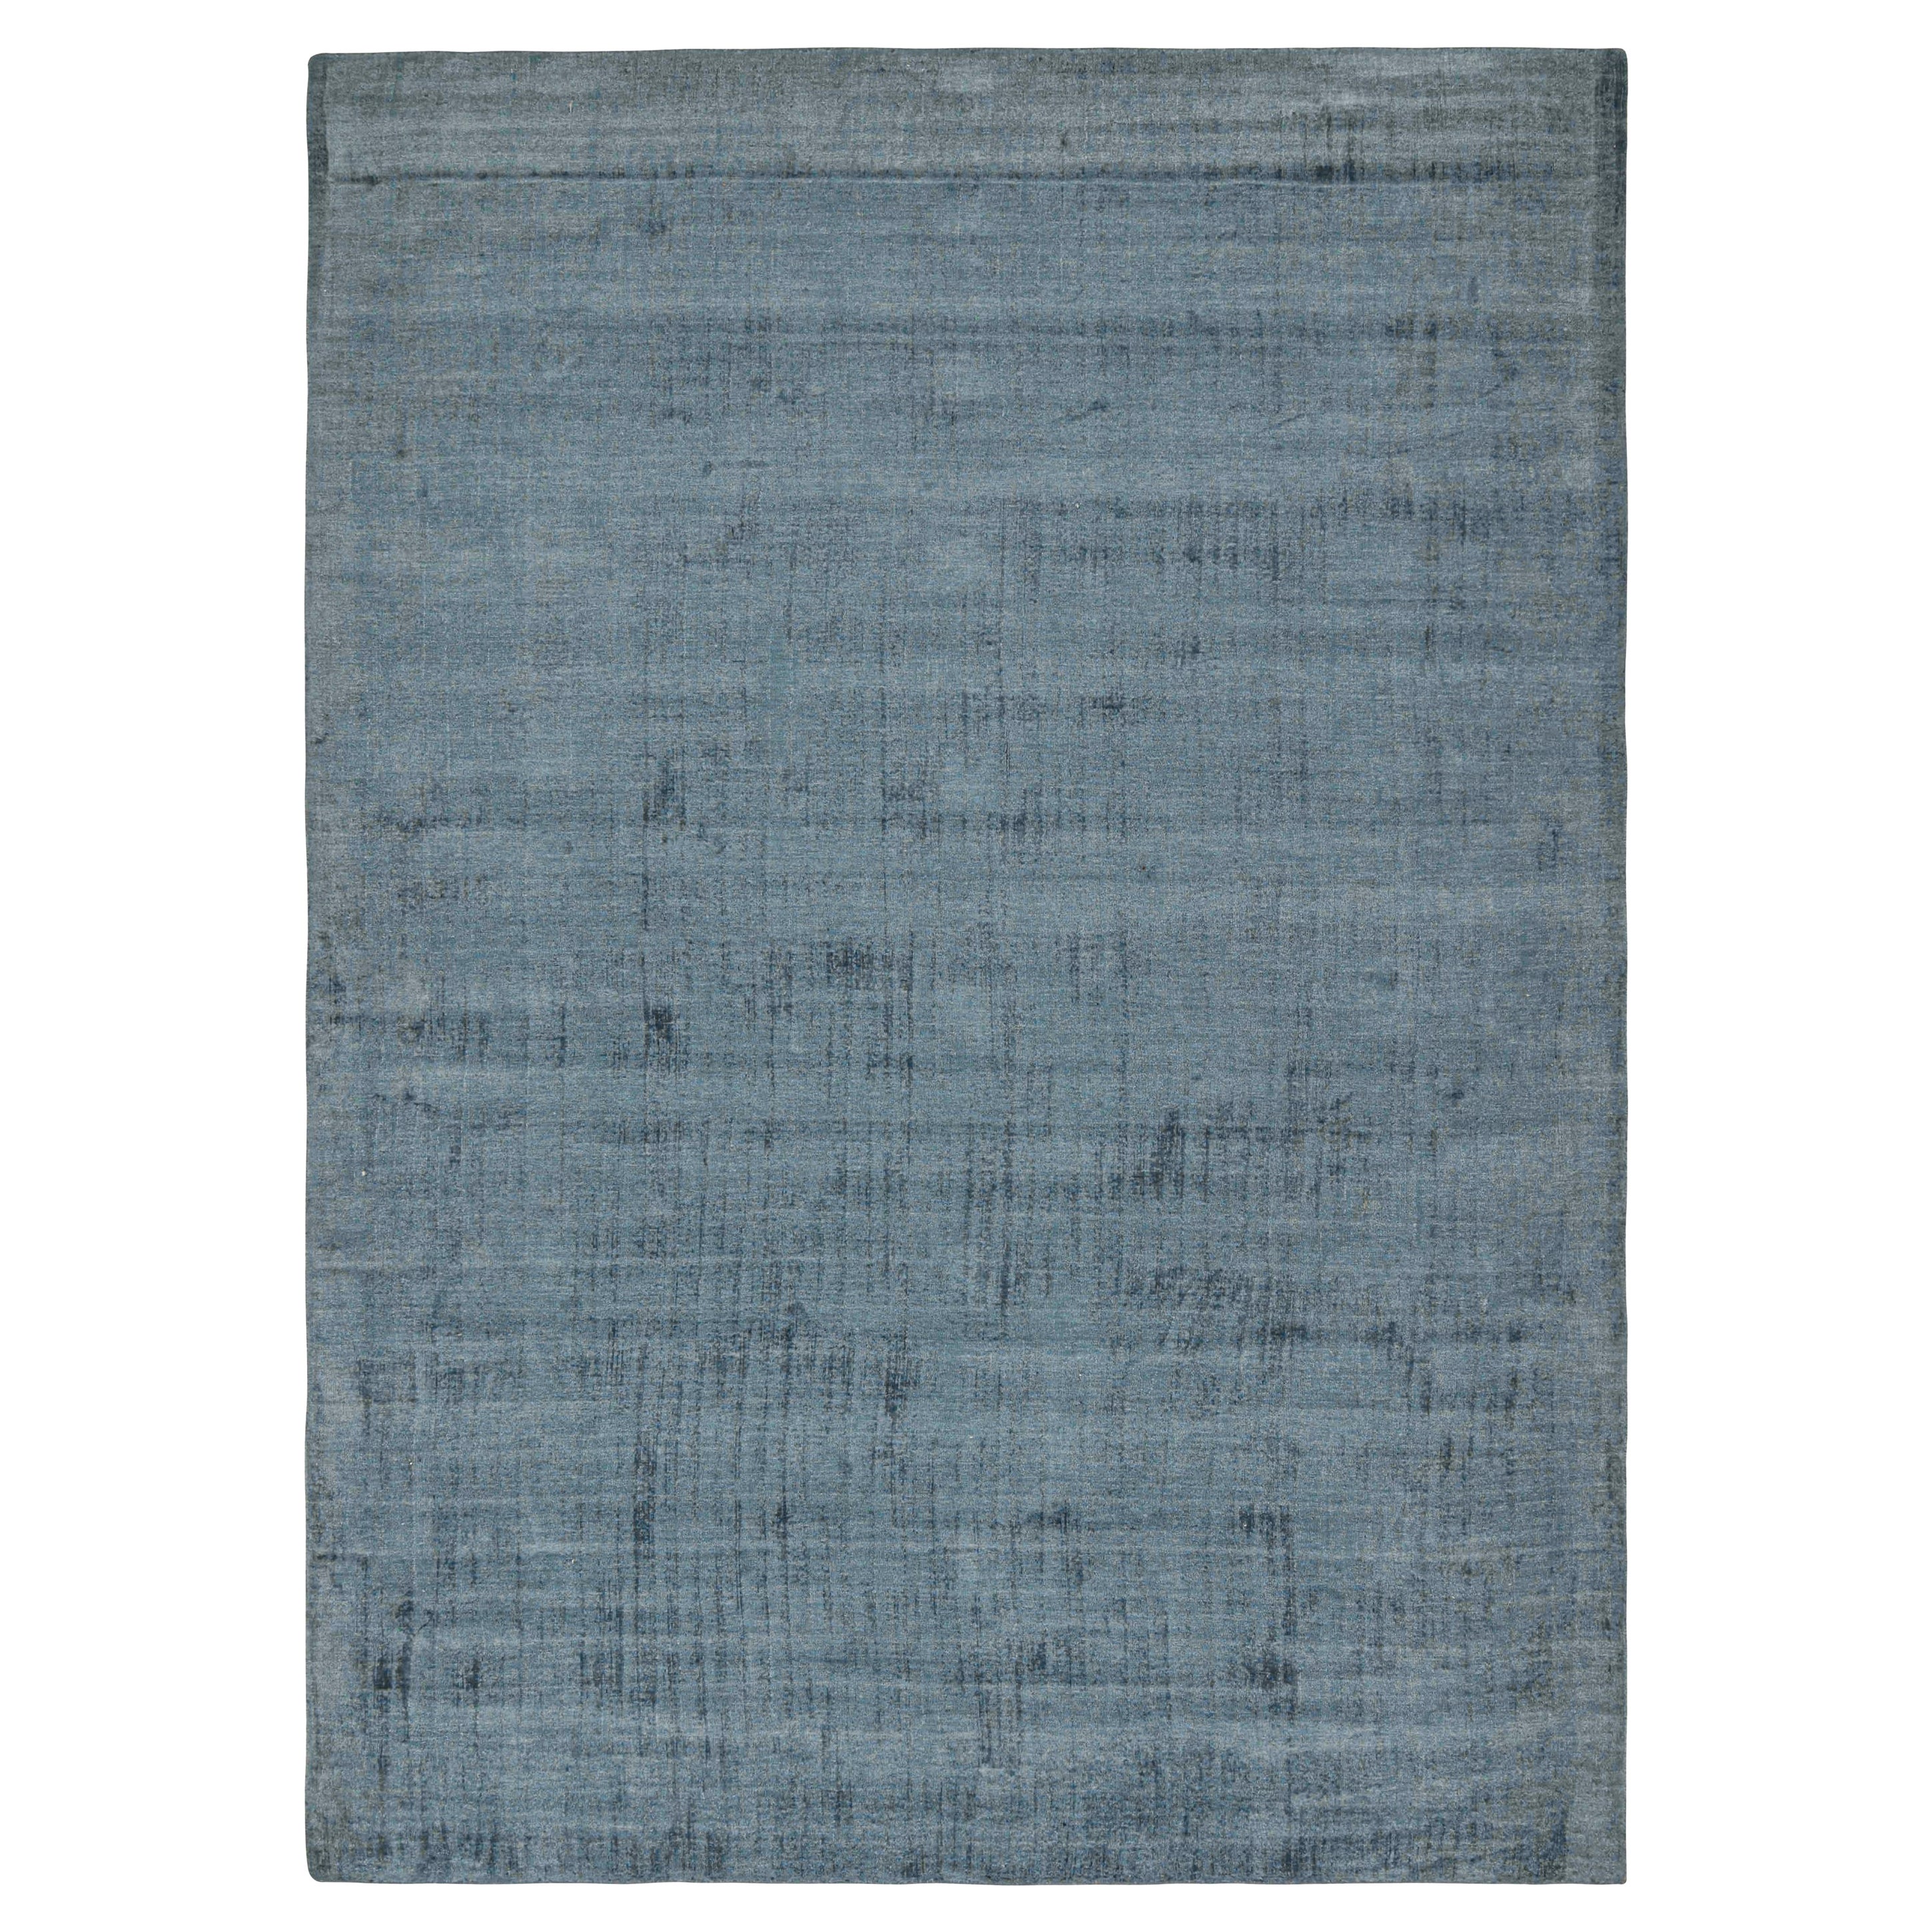 This 10x14 rug is a grand new entry to Rug & Kilim’s Texture of Color Collection. 

Connoisseurs will note this piece is from our new Light on Loom line, which includes quicker custom capabilities than ever before. This piece and others like it can